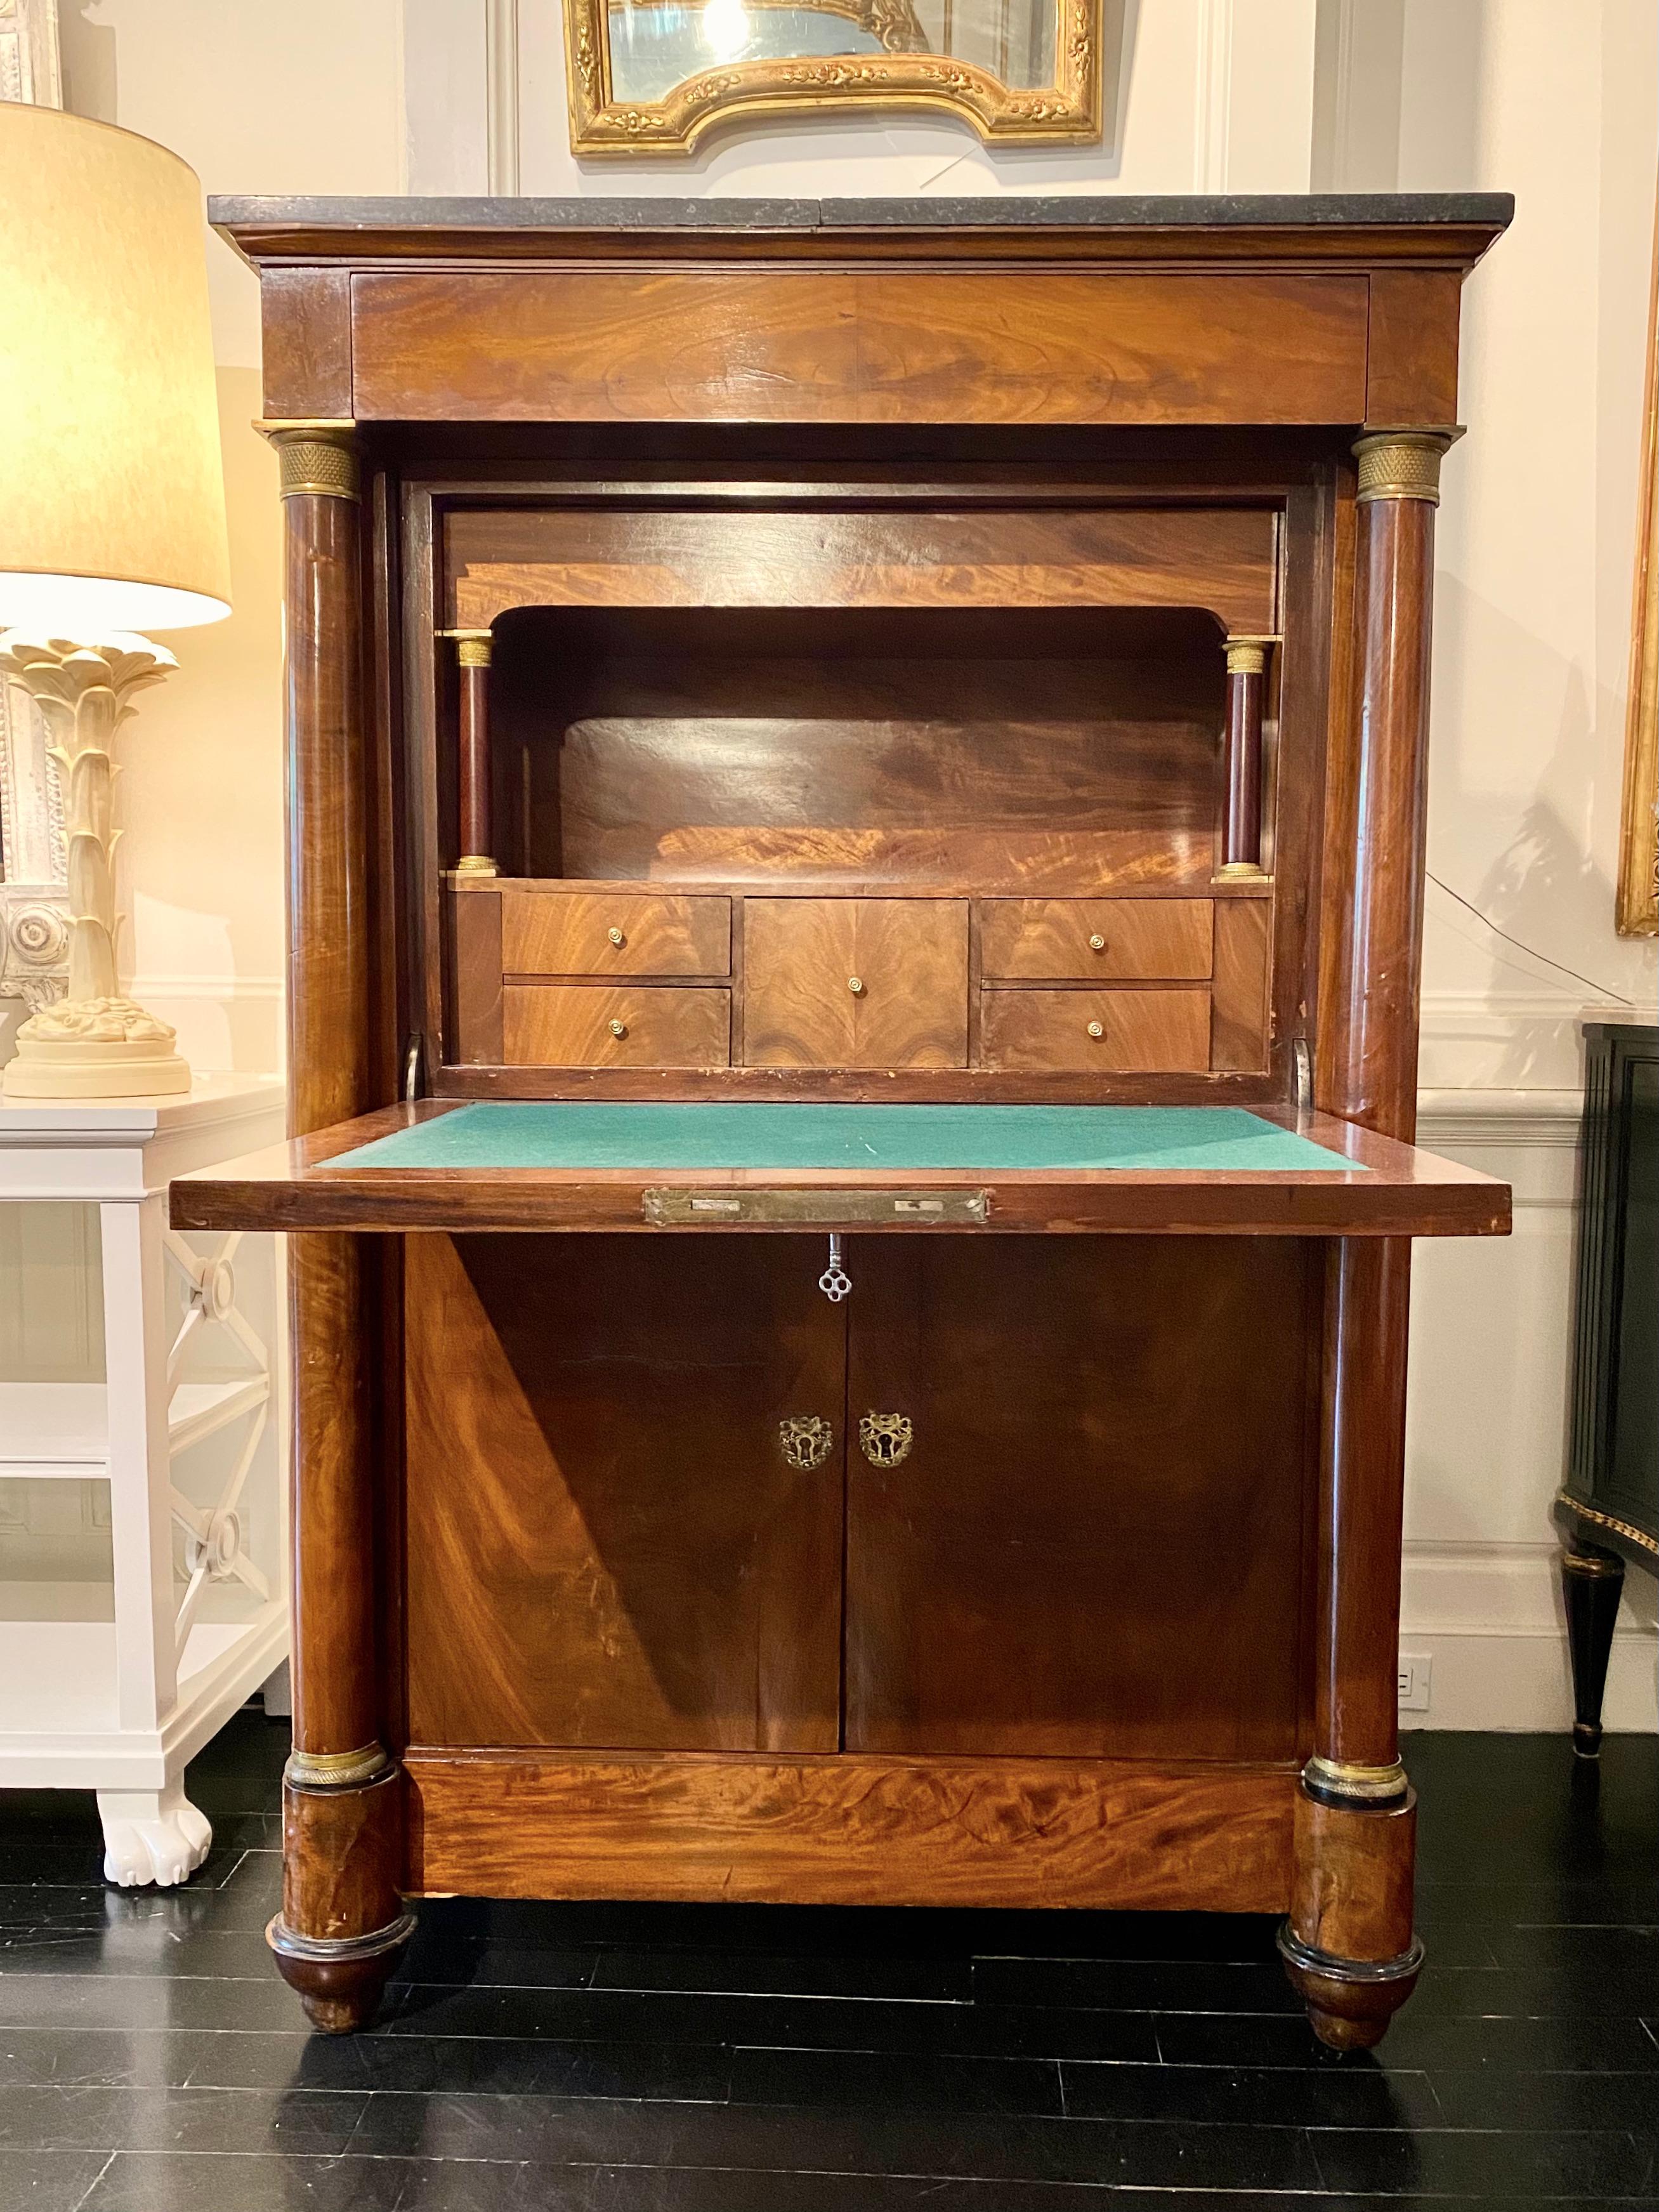 French first Empire period Secretaire à Abattant, also known as a drop-front secretary, fall front or cantilevered desk. Under the dark grey marble top is a secret, entablature drawer. A cantilevered fall front opens to reveal several drawers, a